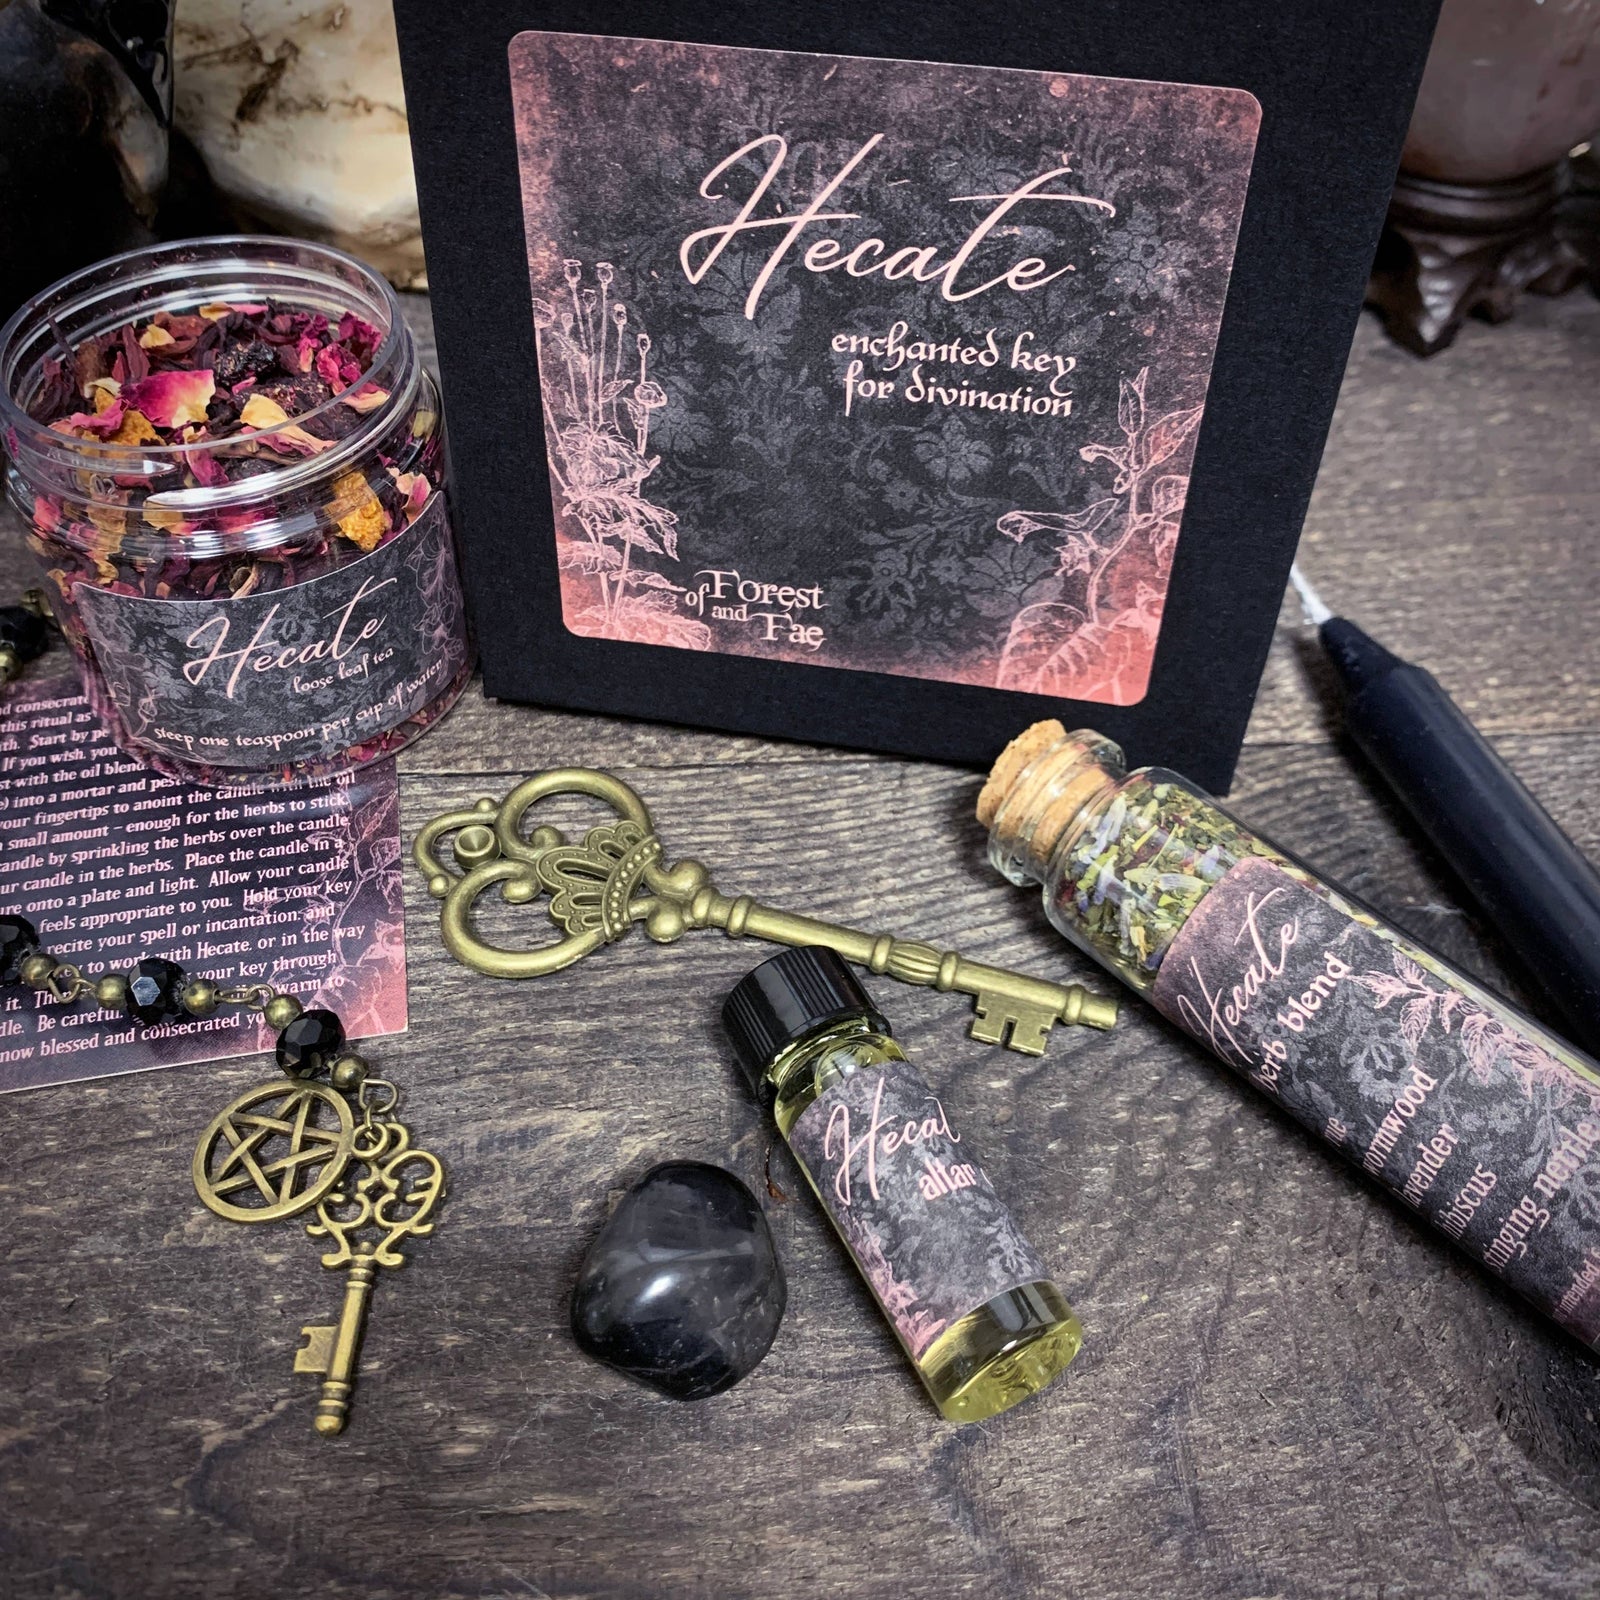 Hecate Enchanted Key DIY Kit | Ritual Kit | Witch Kit | Crossroads | Witchcraft Kit | Wicca | Divination | Skeleton Key Spell | Hekate Kit